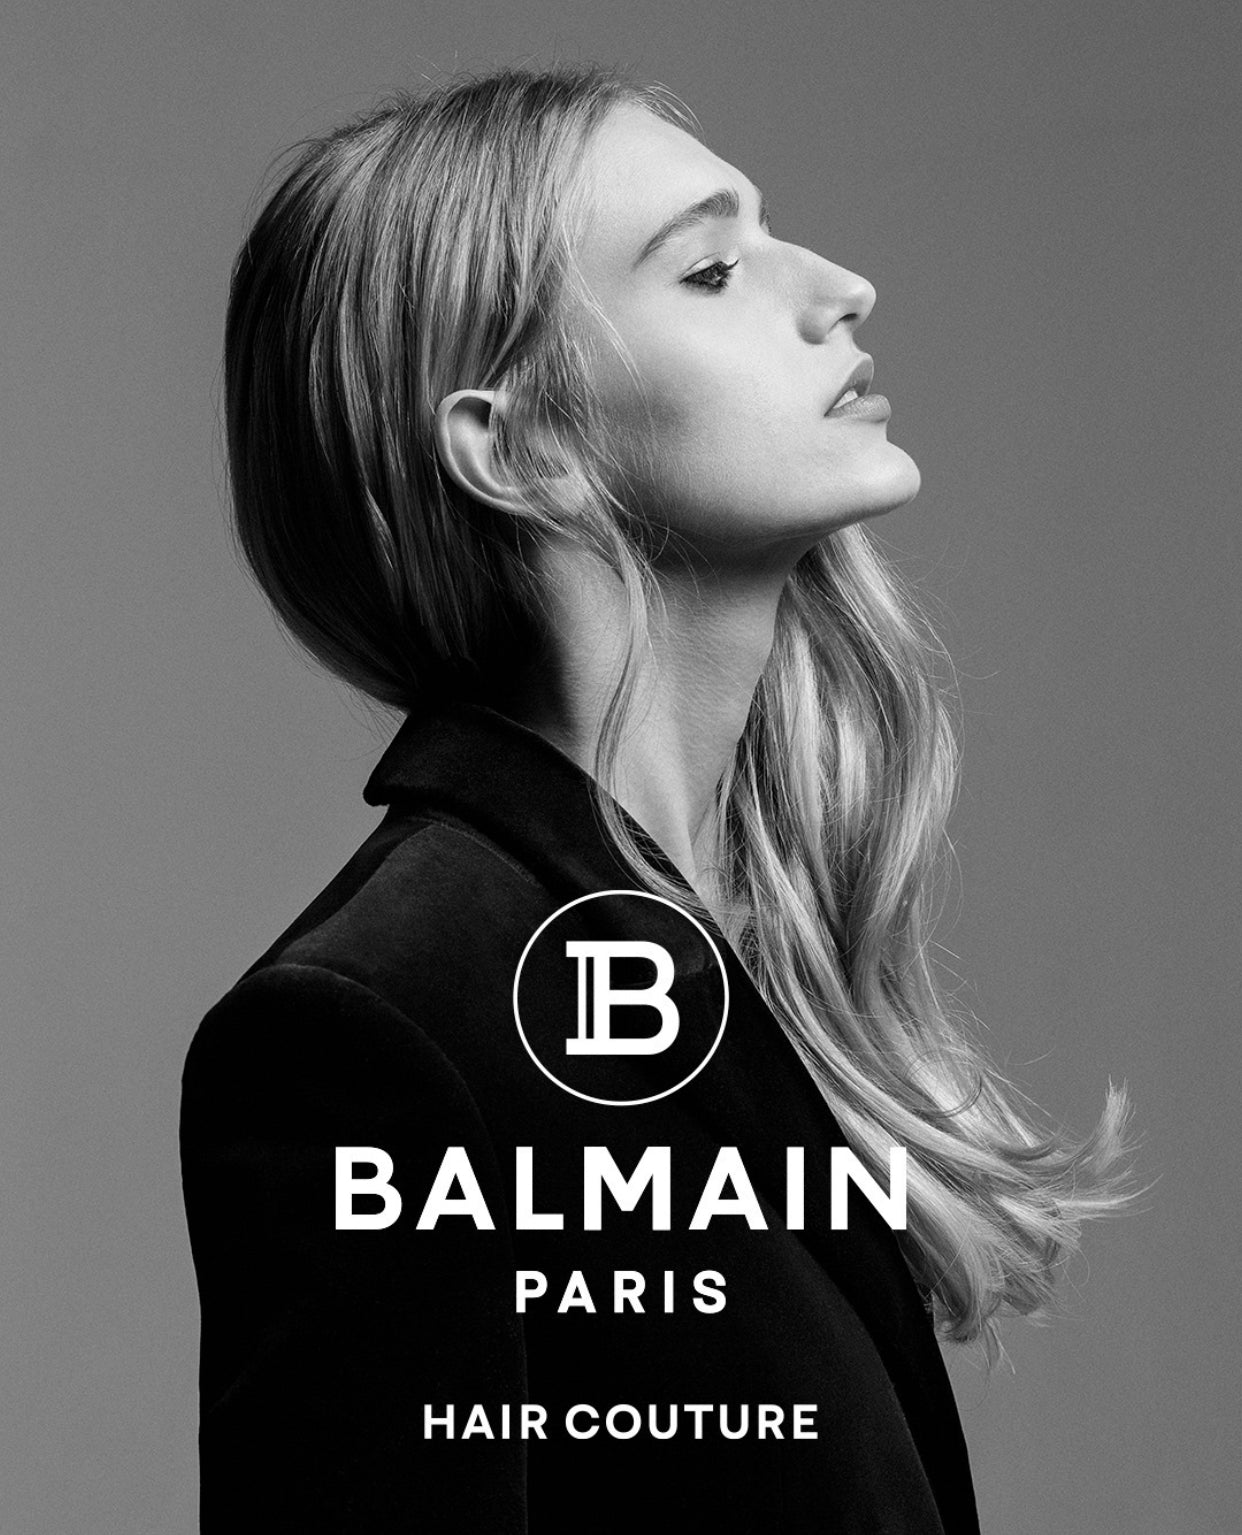 About the - Balmain Hair Couture – Luxury Haircare Company